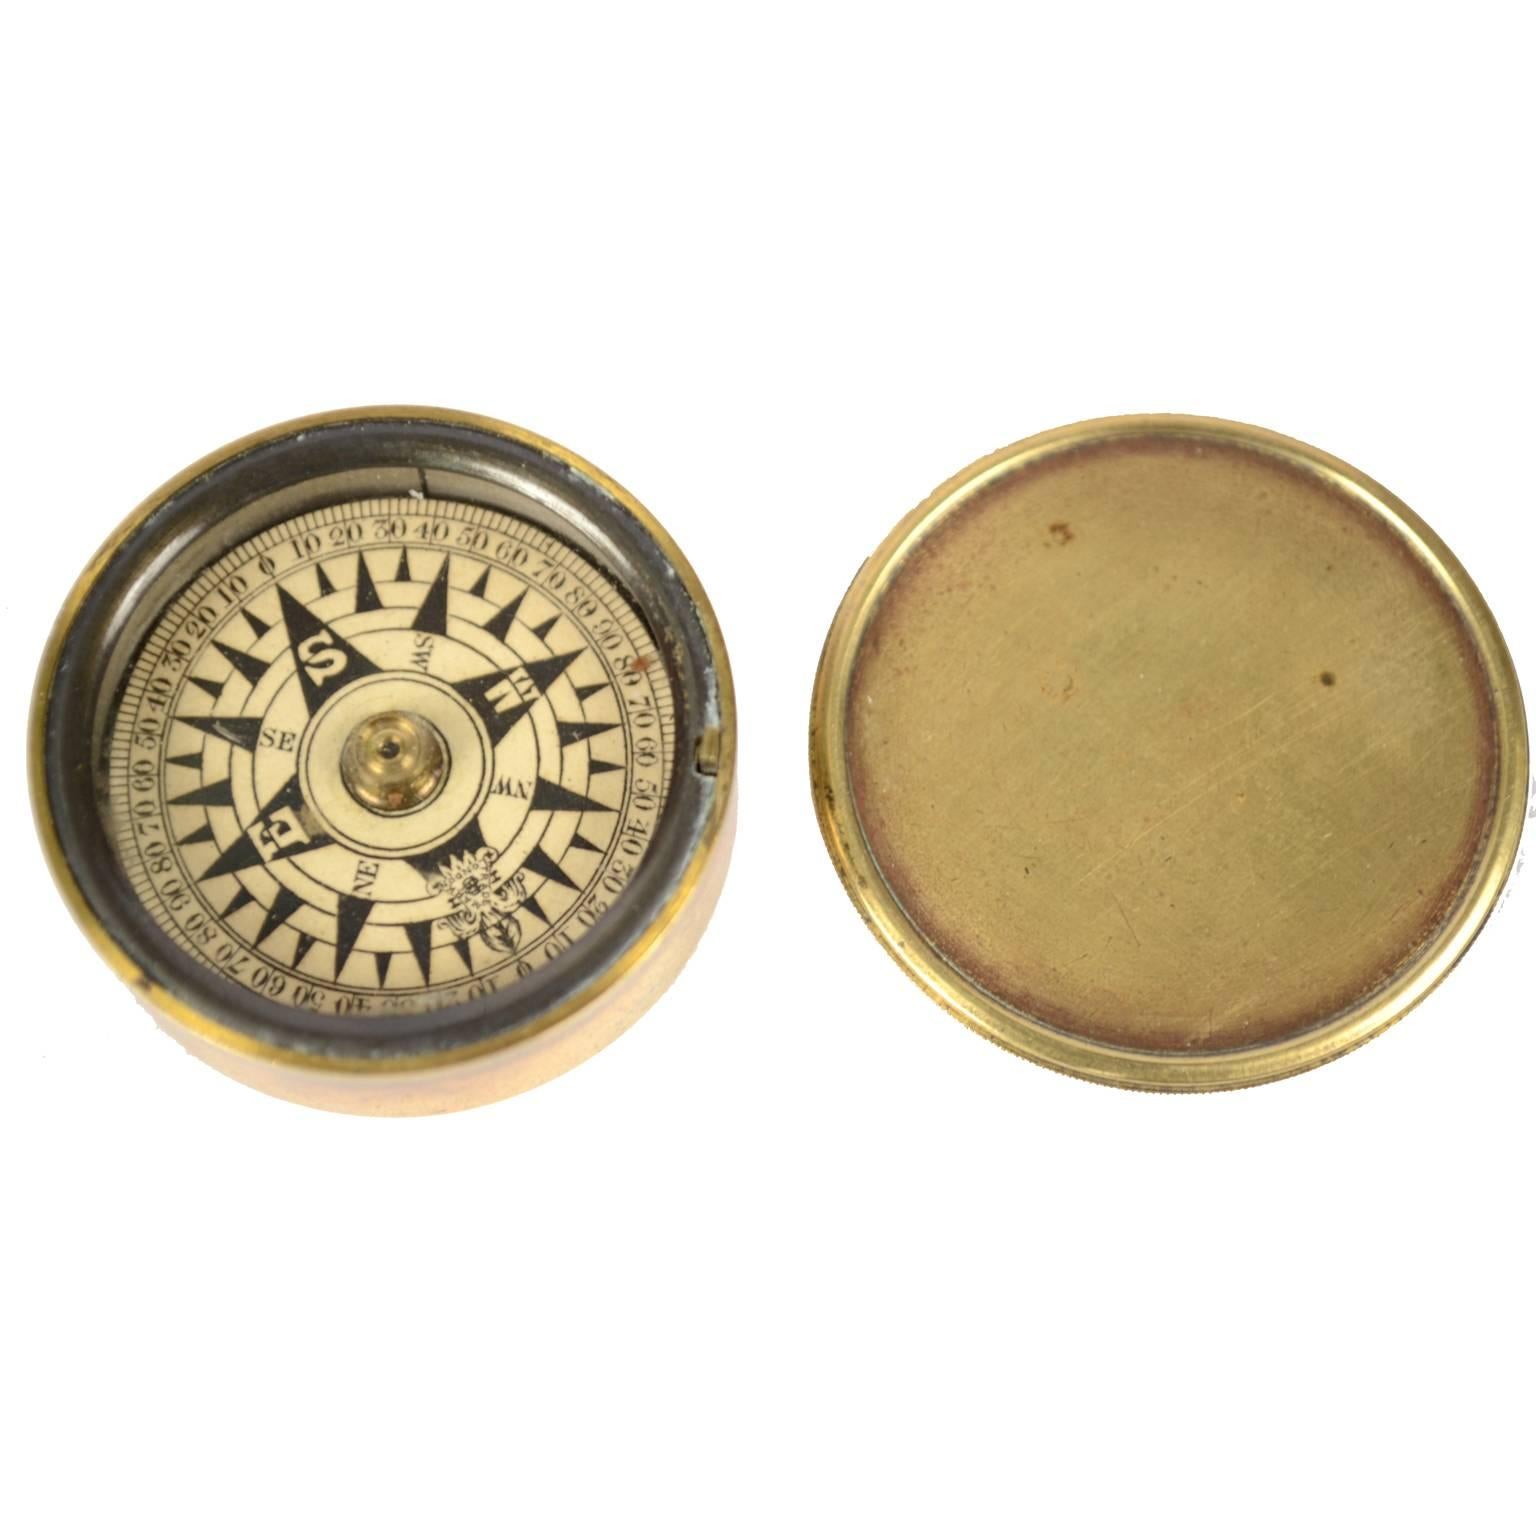 Dry Pocket Nautical Compass Placed in Its Original Box Made of Turned Brass